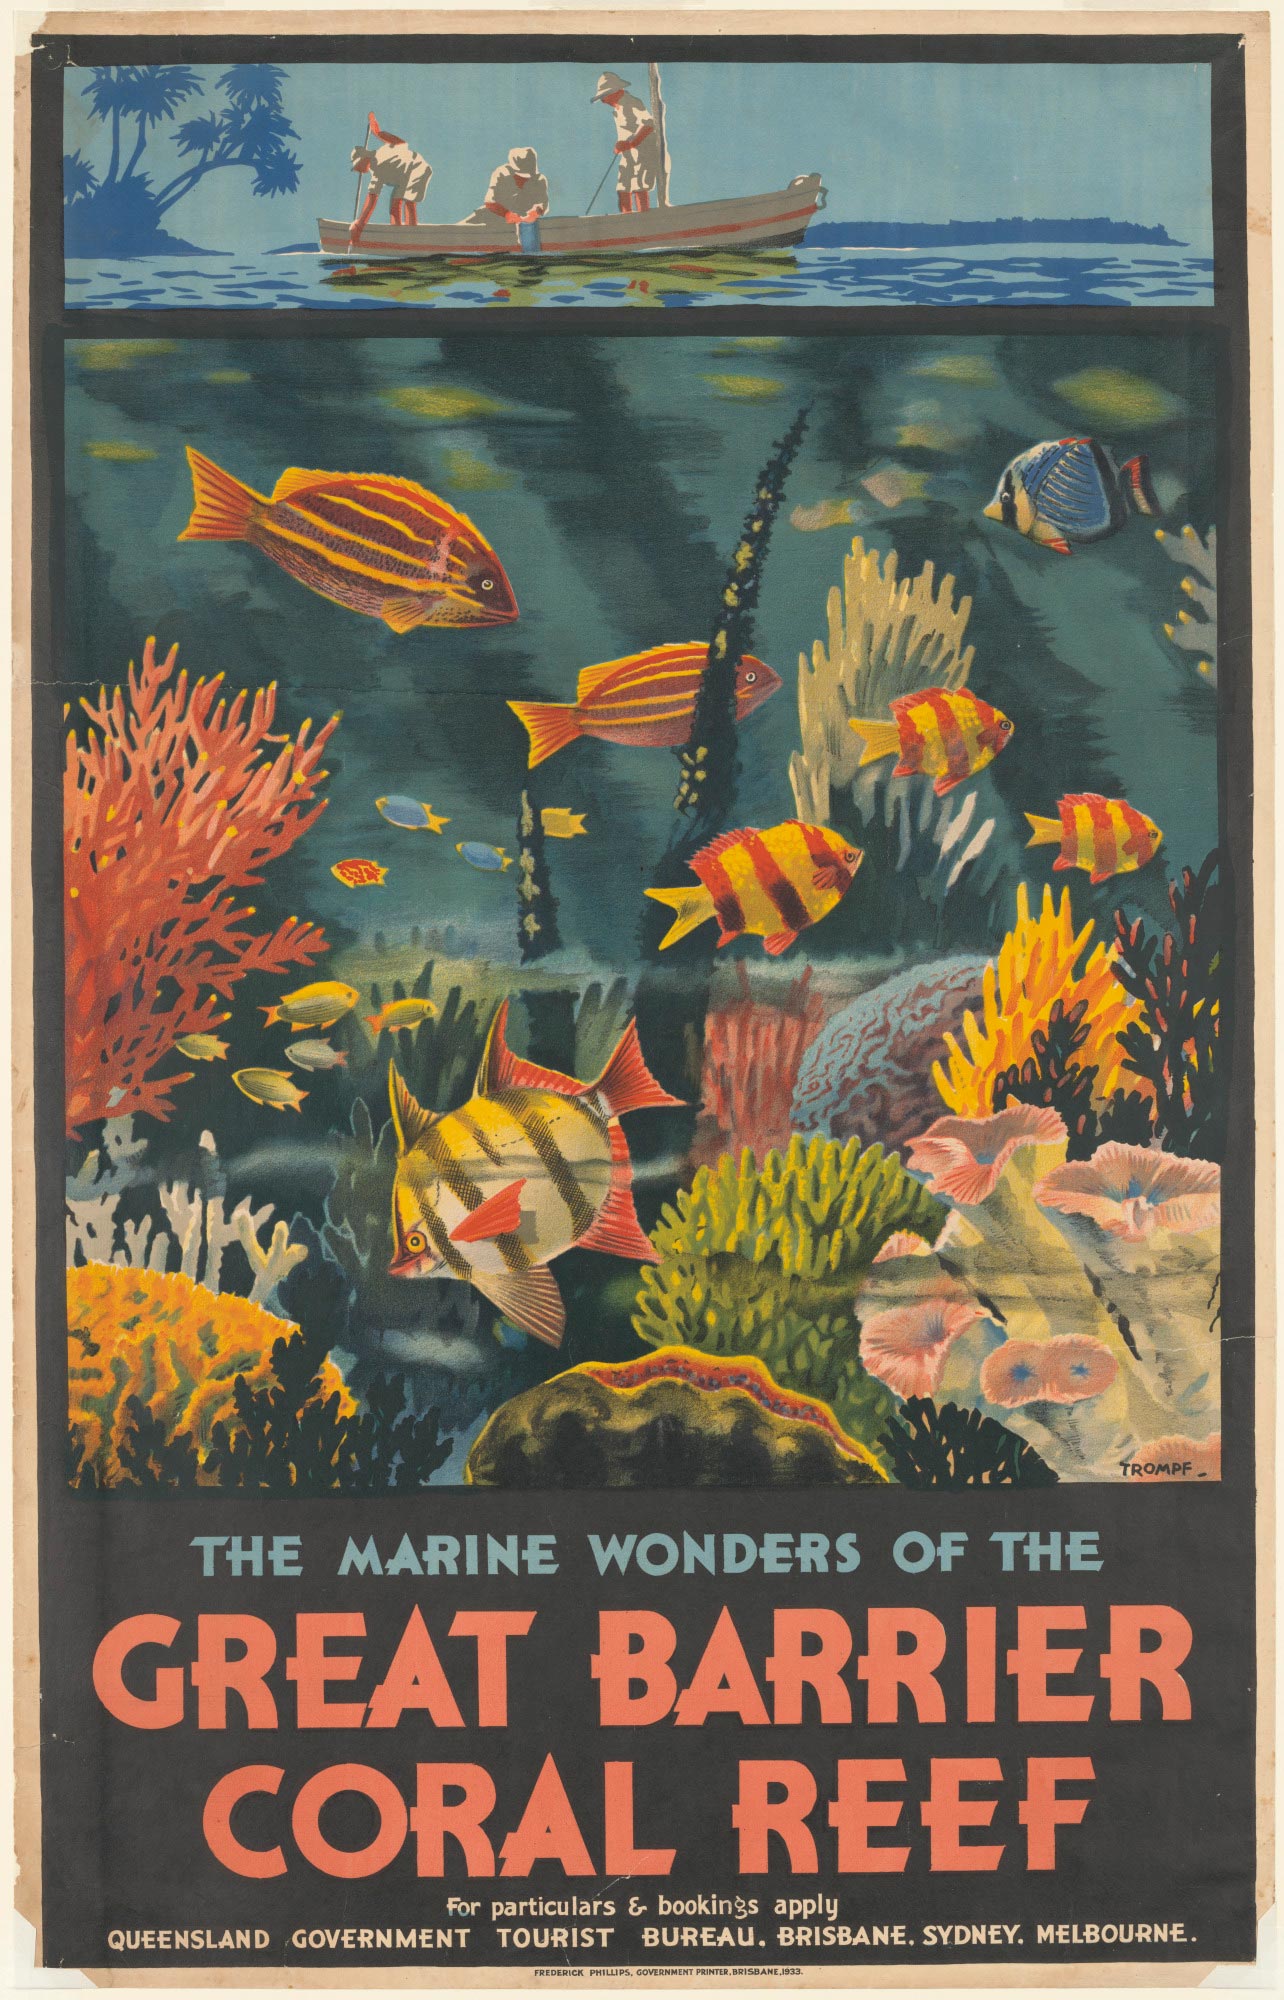 Tourism poster, ‘The Marine wonders of the Great Barrier Coral Reef’ 1933.